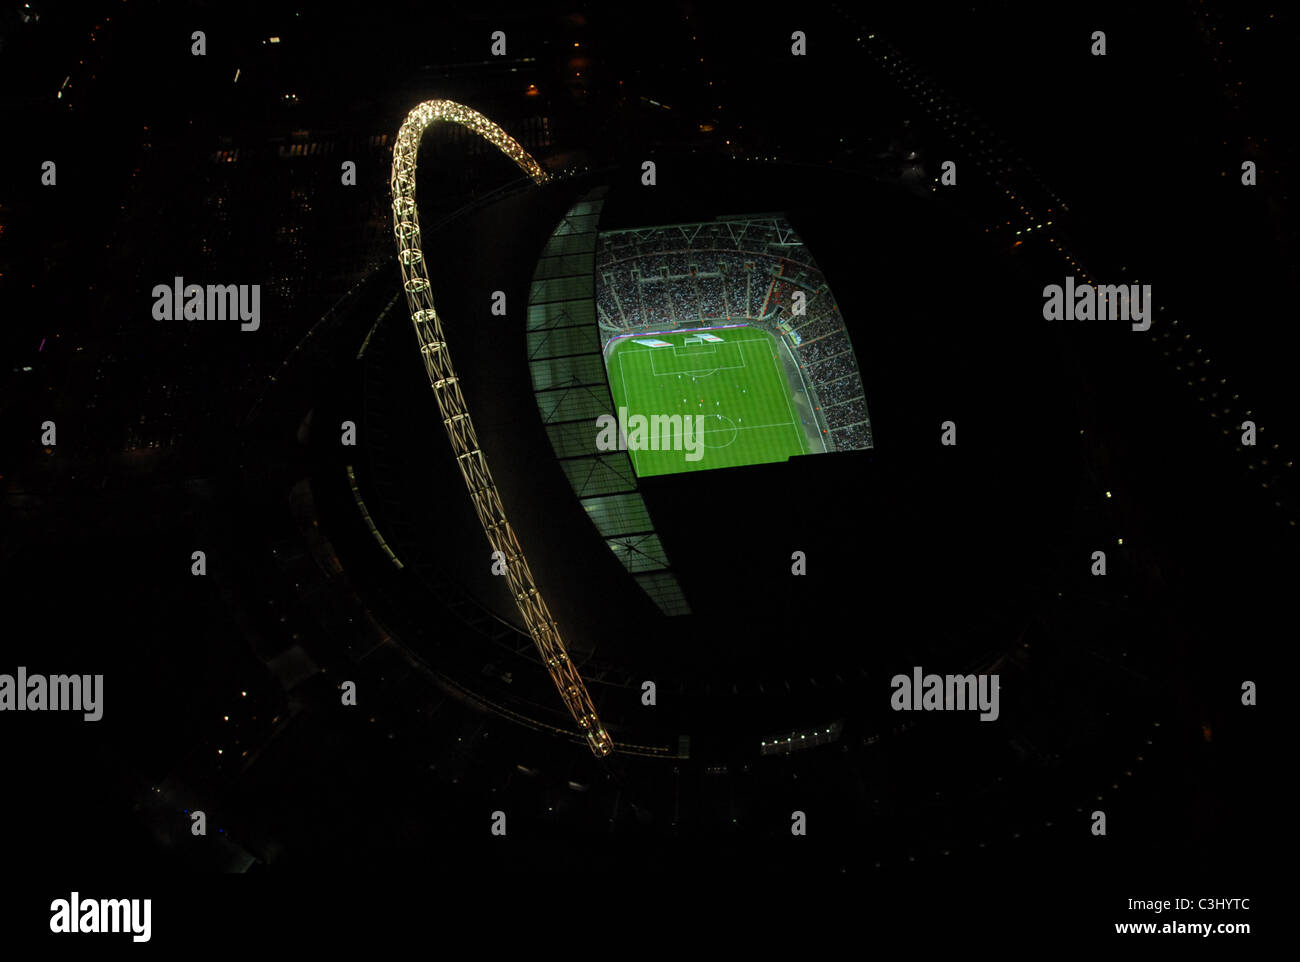 aerial shot of Wembley stadium during a England football international at night taken from a helicopter Stock Photo